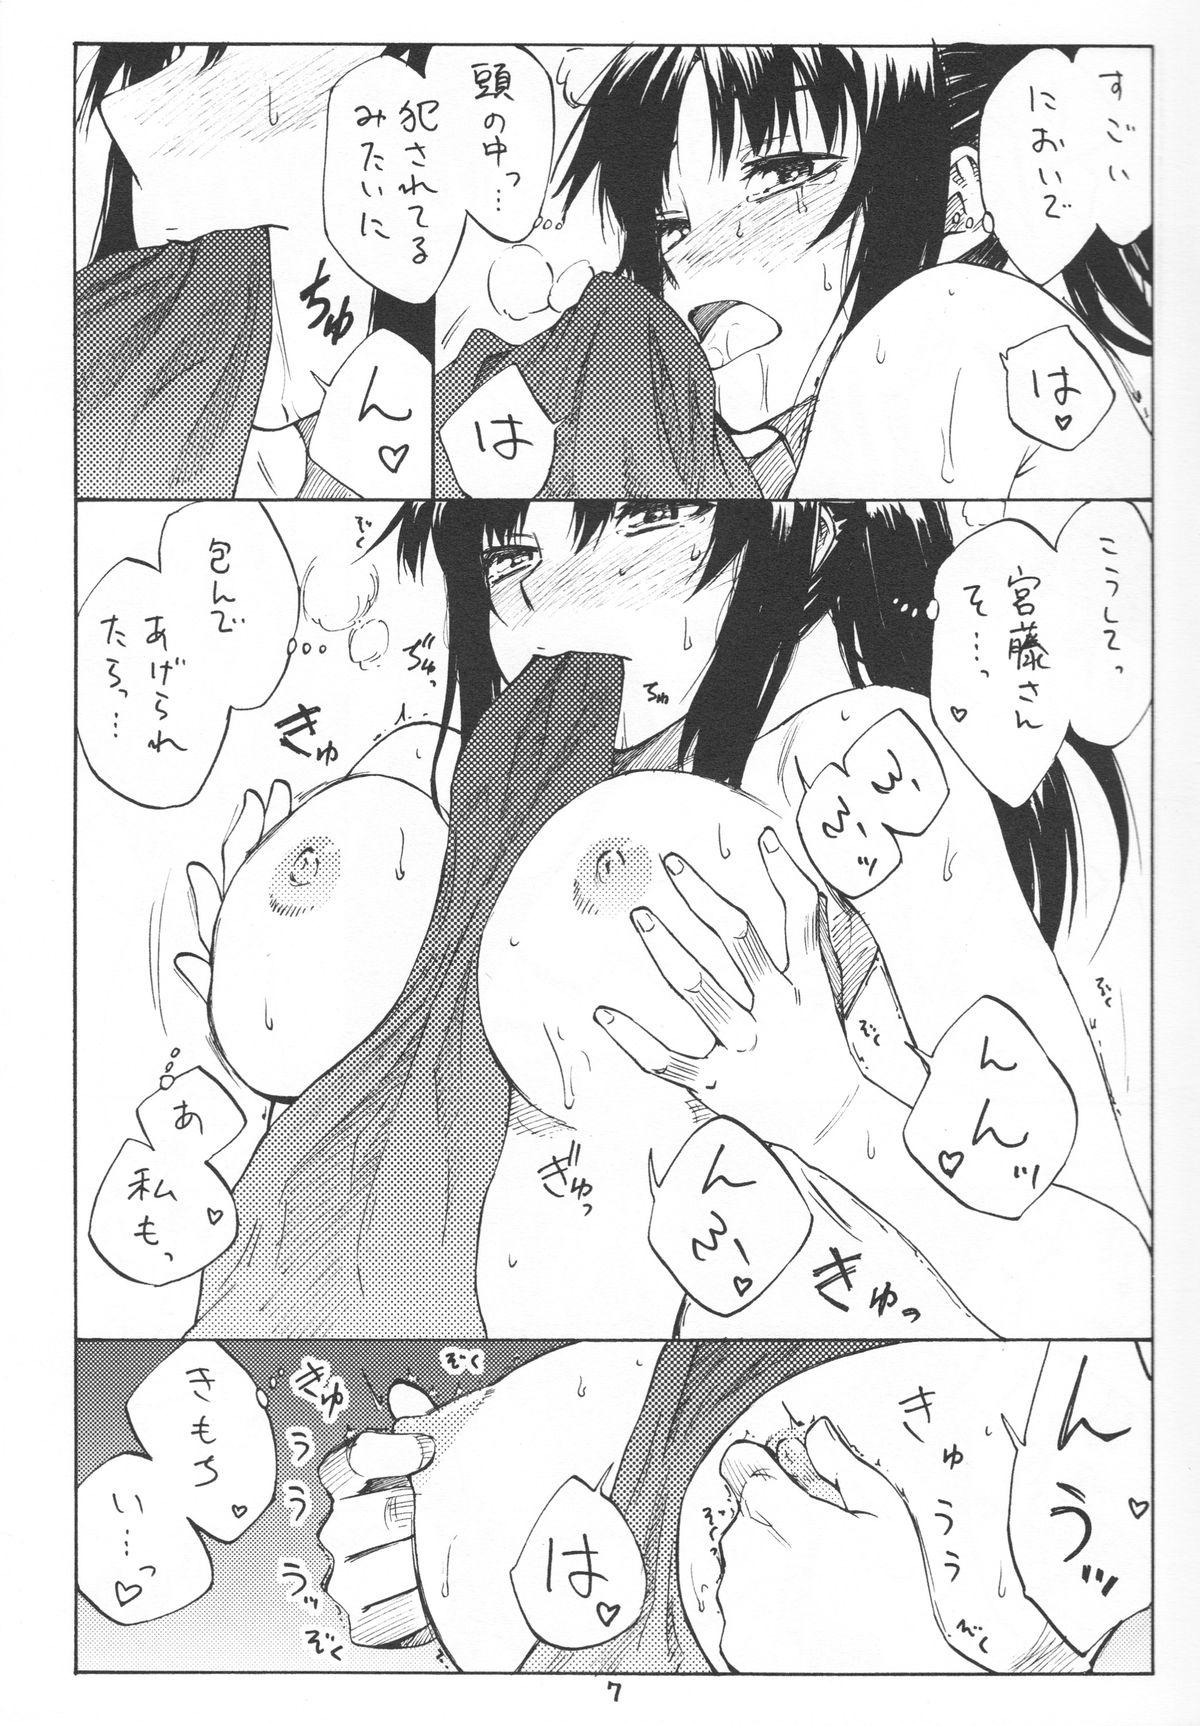 Transvestite Greatest! - Strike witches Gapes Gaping Asshole - Page 7